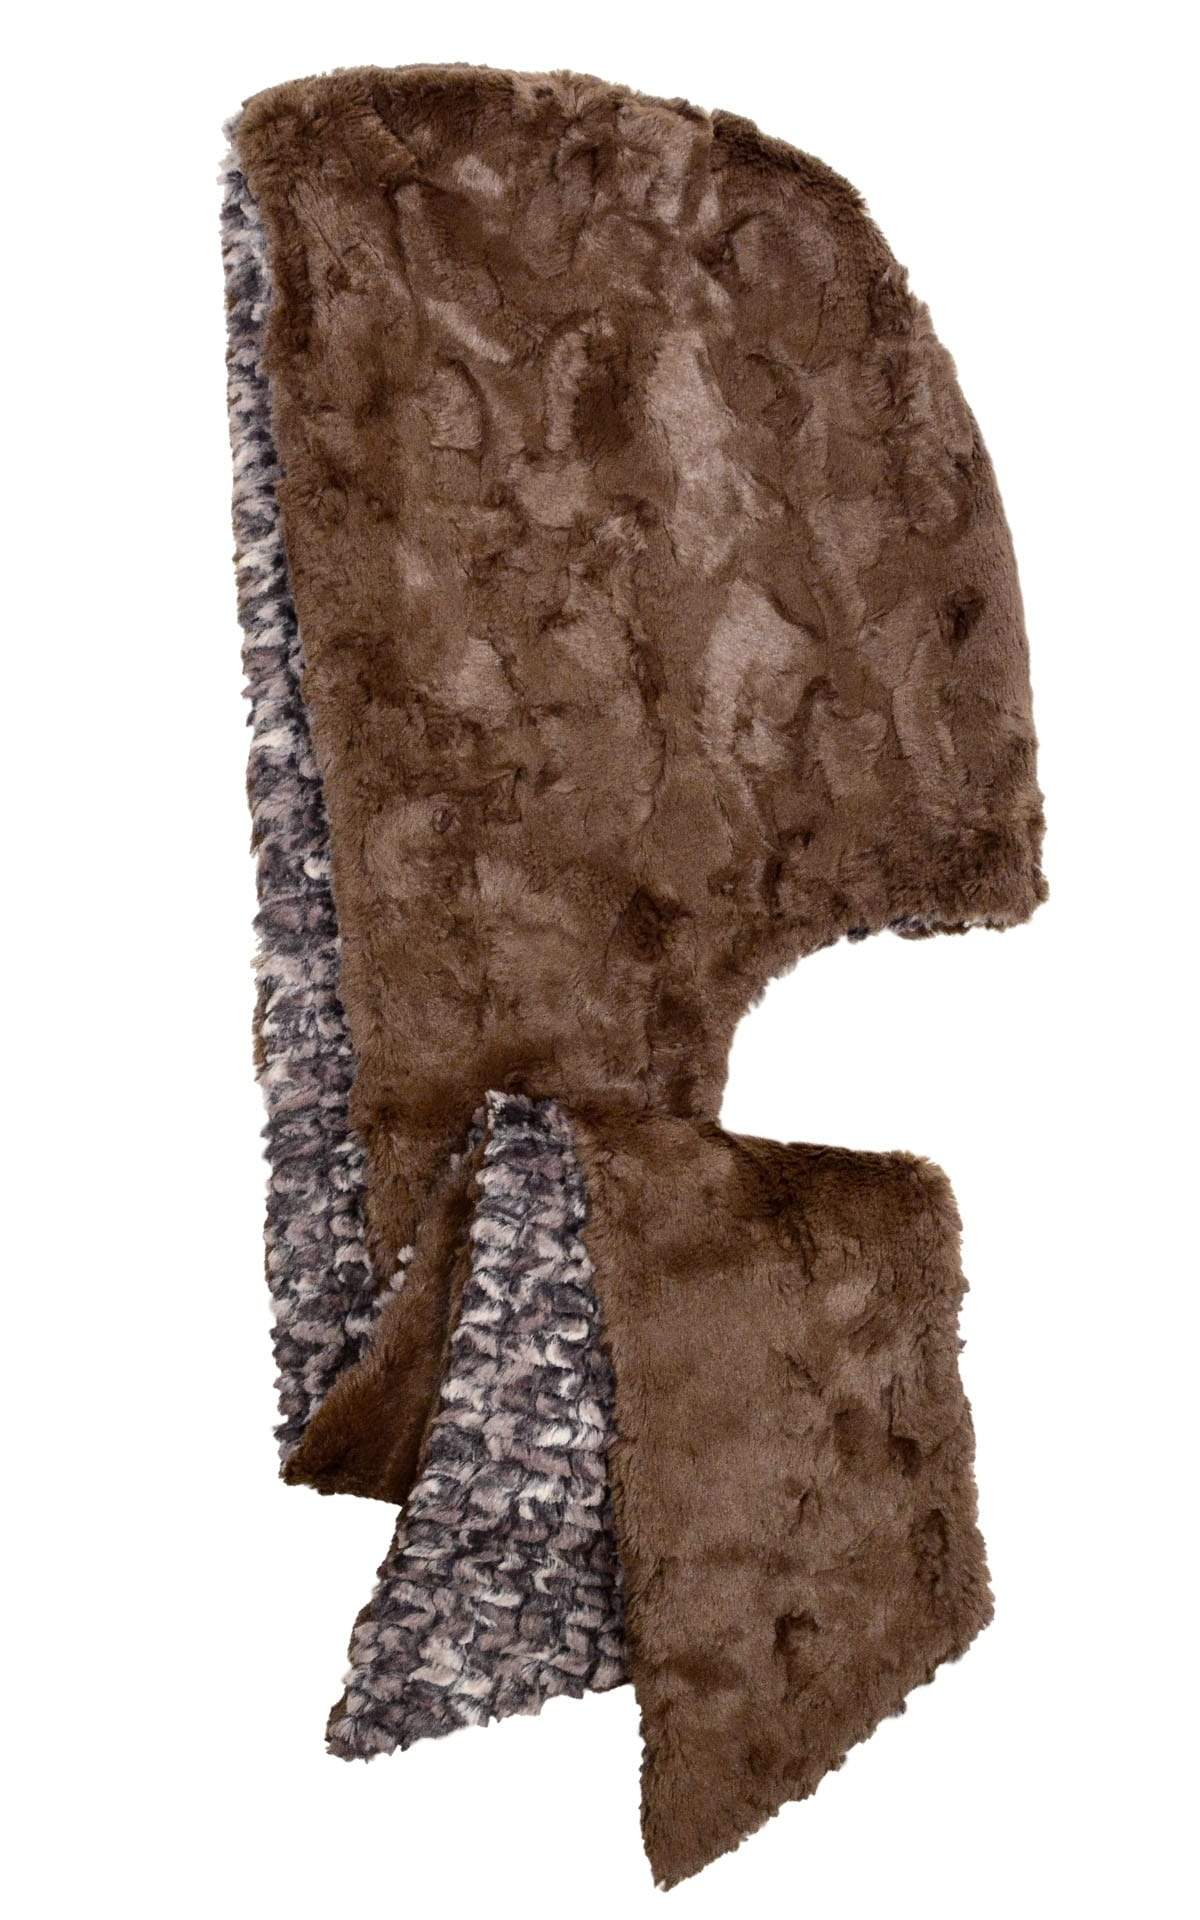 Hoody Scarf - Luxury Faux Fur in Calico with Cuddly Fur in Chocolate